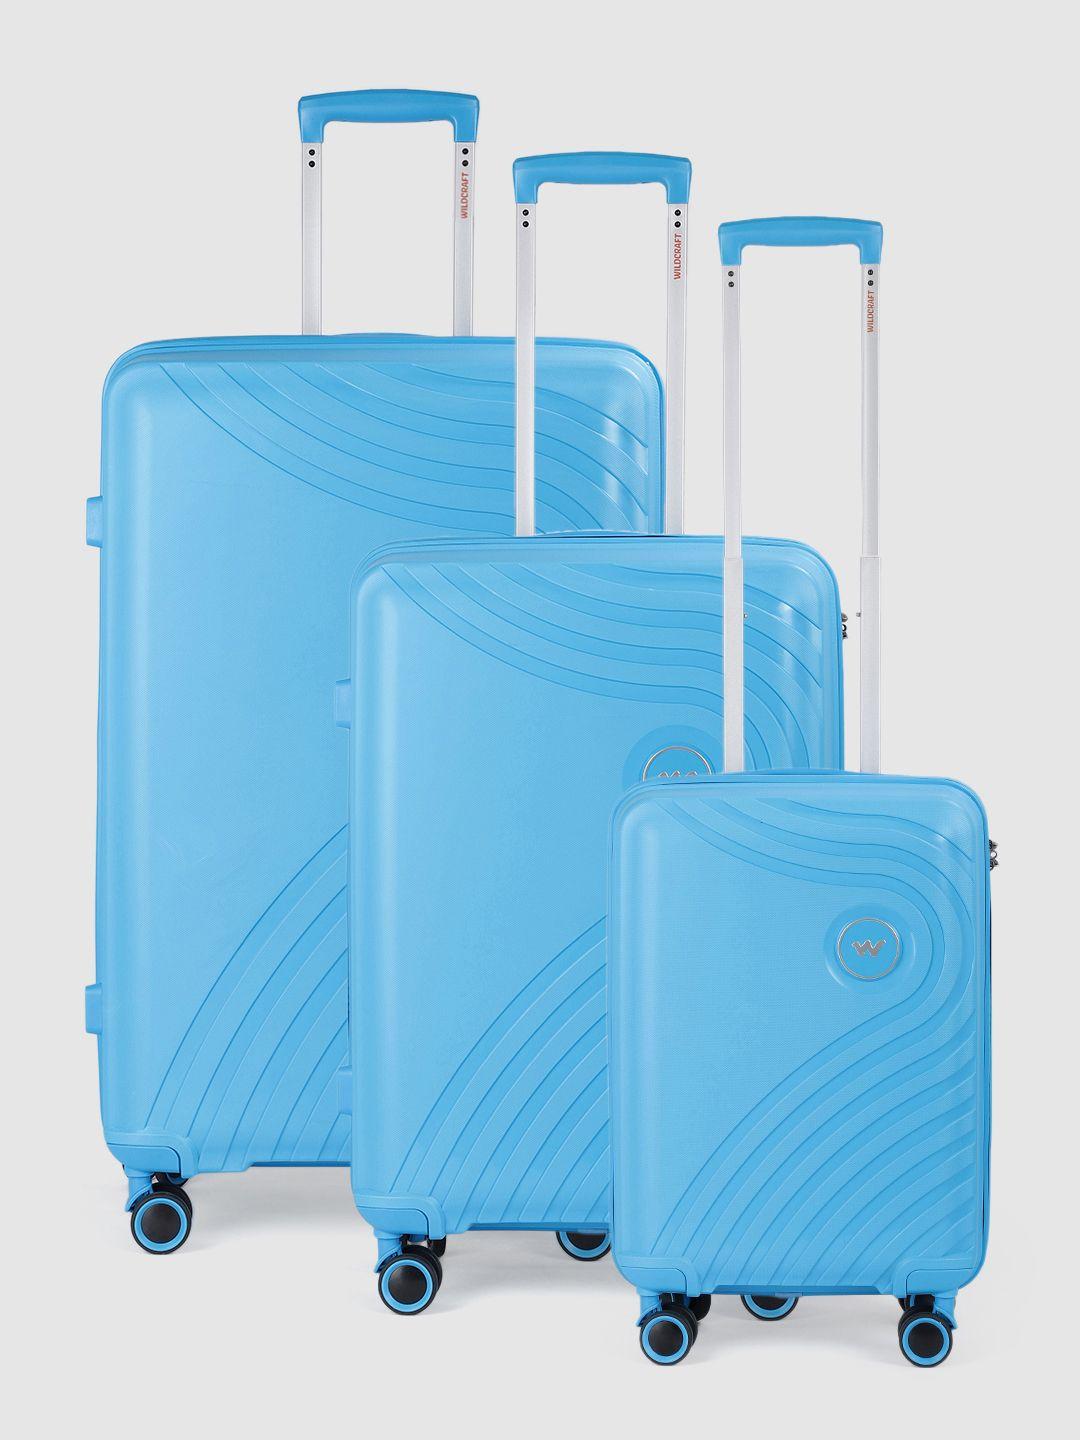 wildcraft set of 3 onyx textured hard-sided trolley suitcases - cabin, medium & large